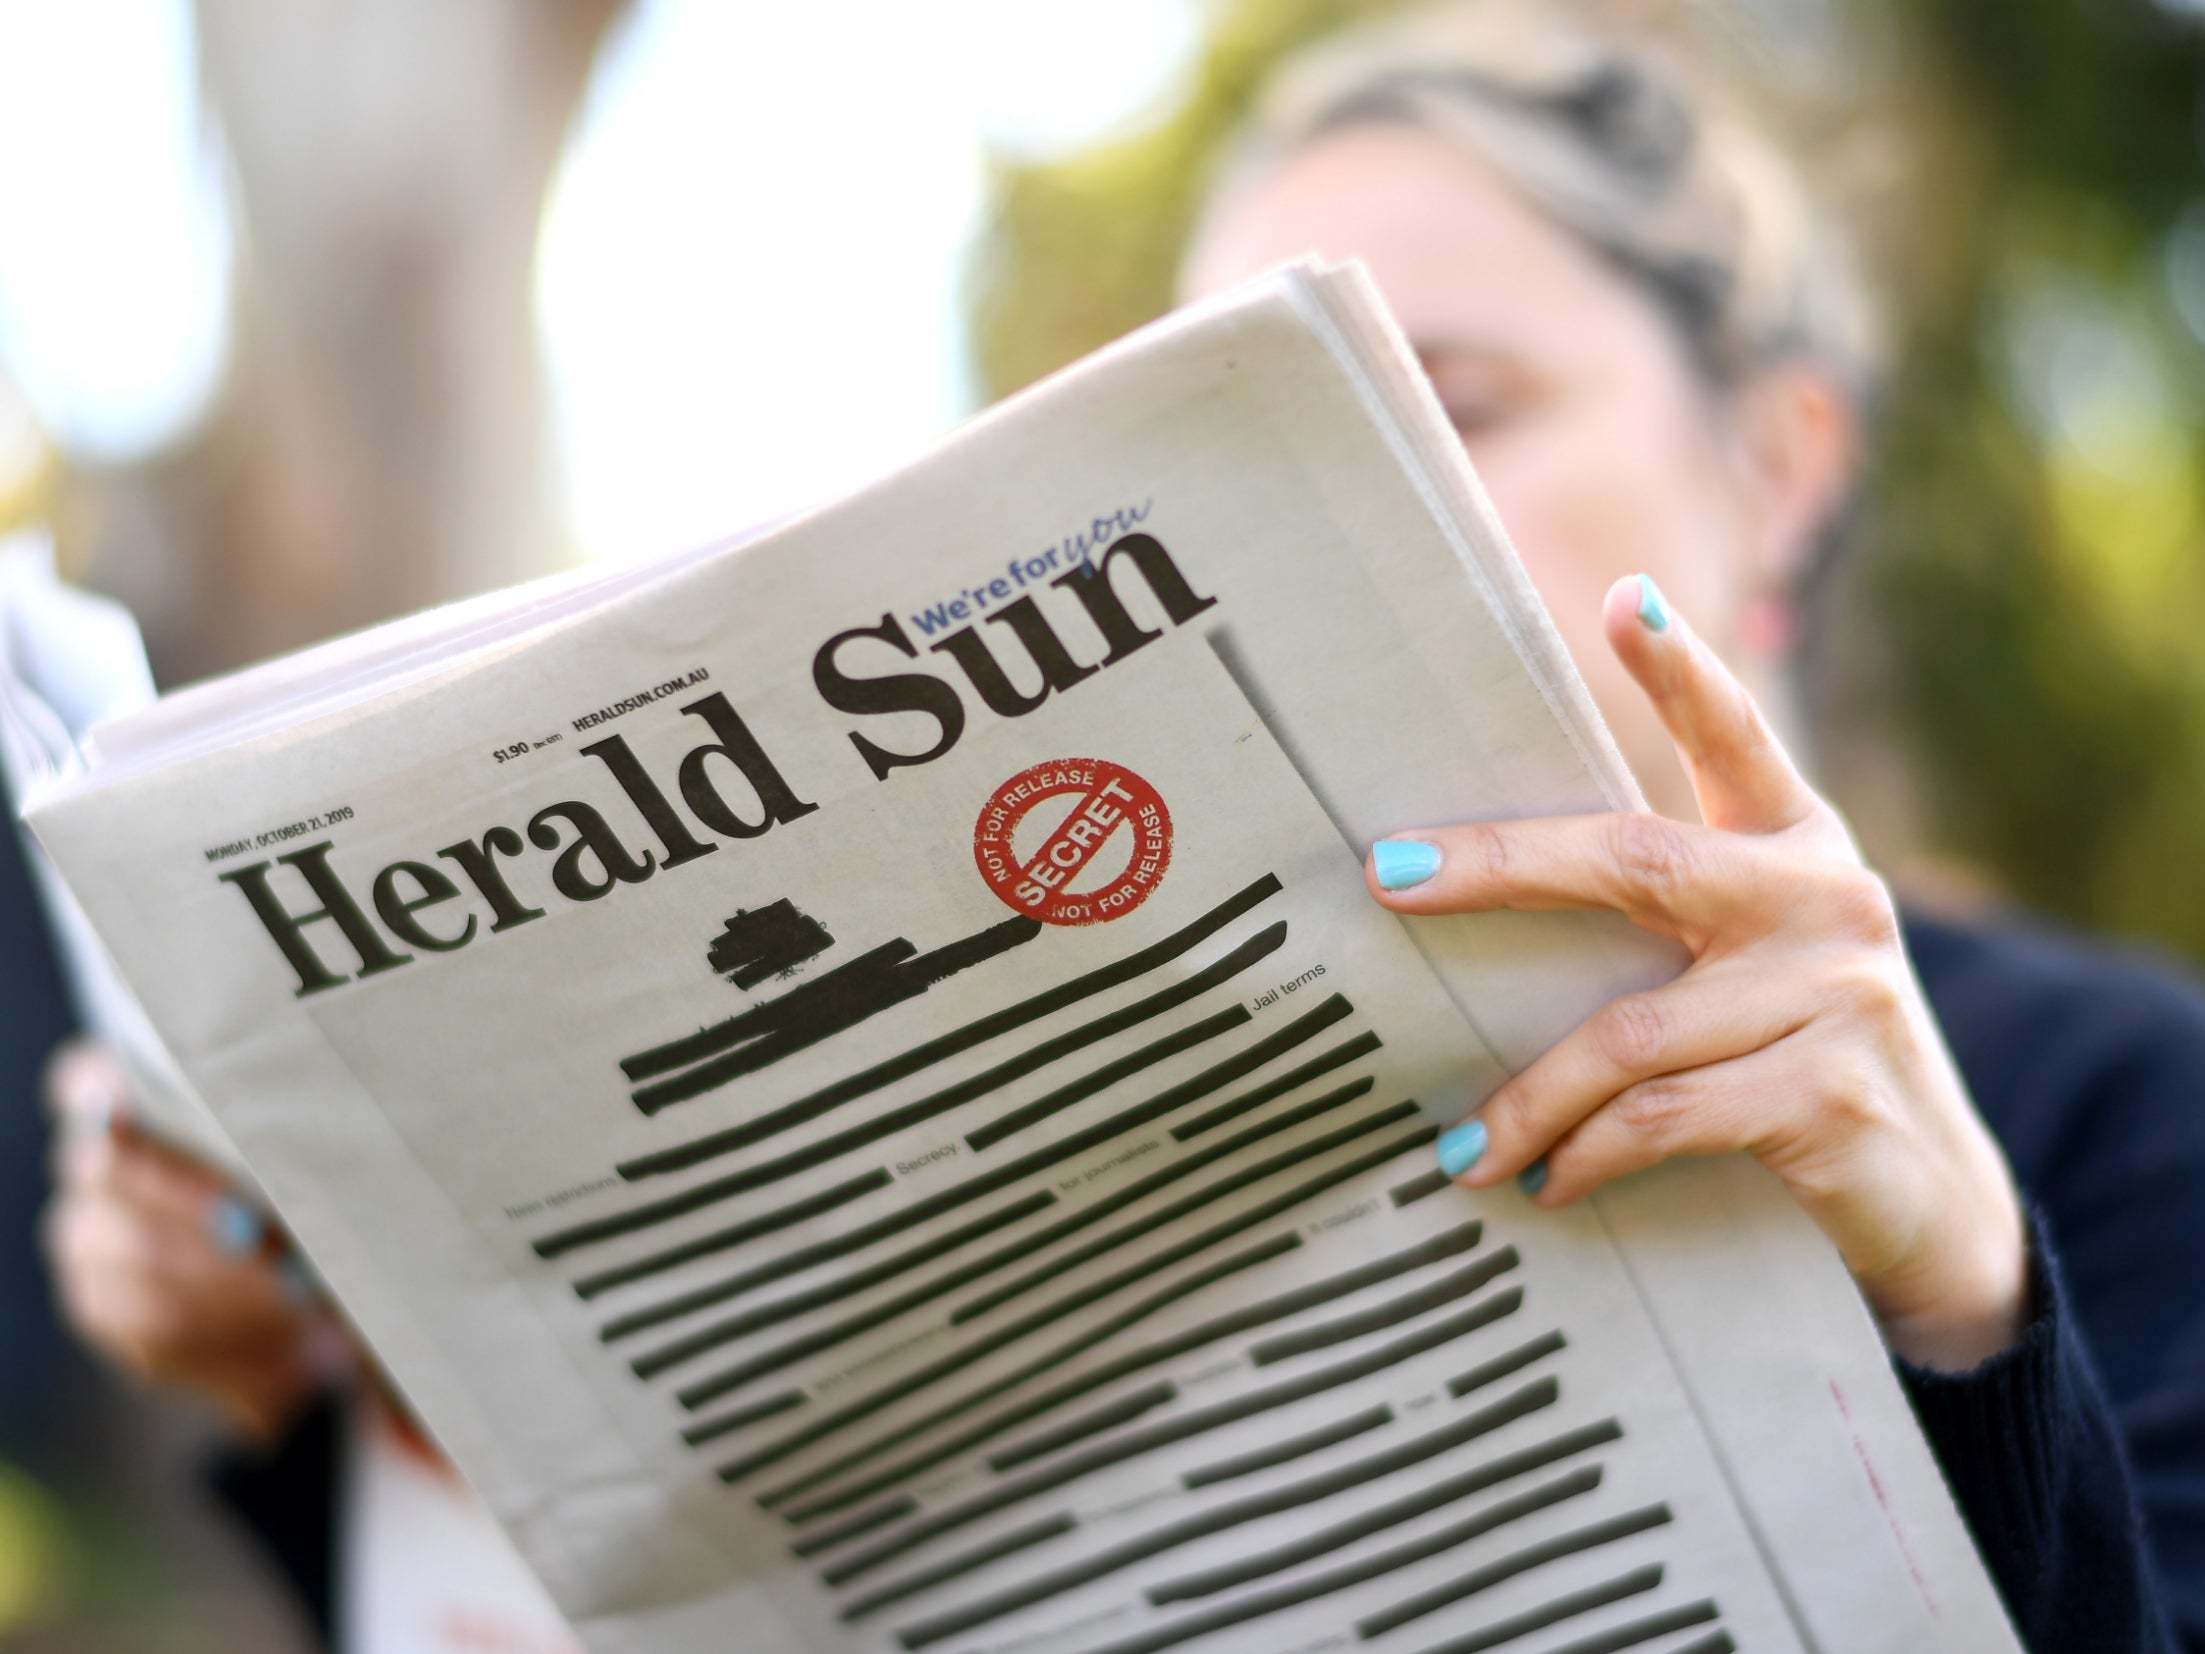 Regional and national papers ran blacked-out front pages